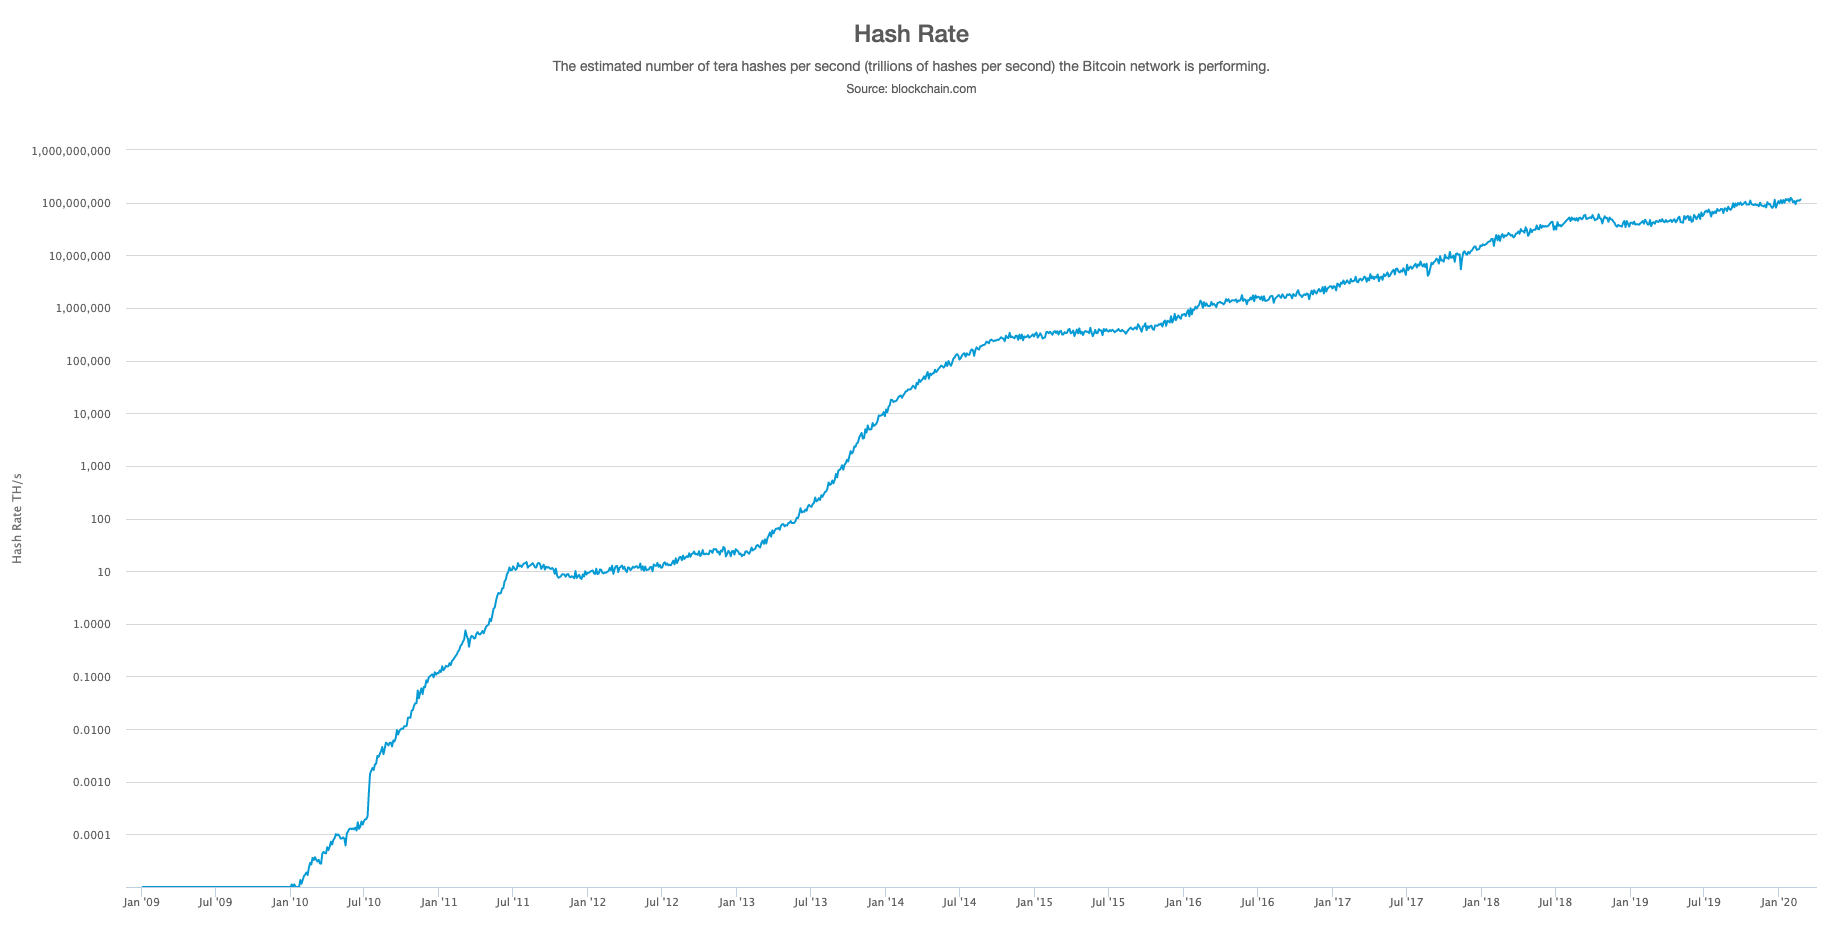 Bitcoin Hash Rate over time.